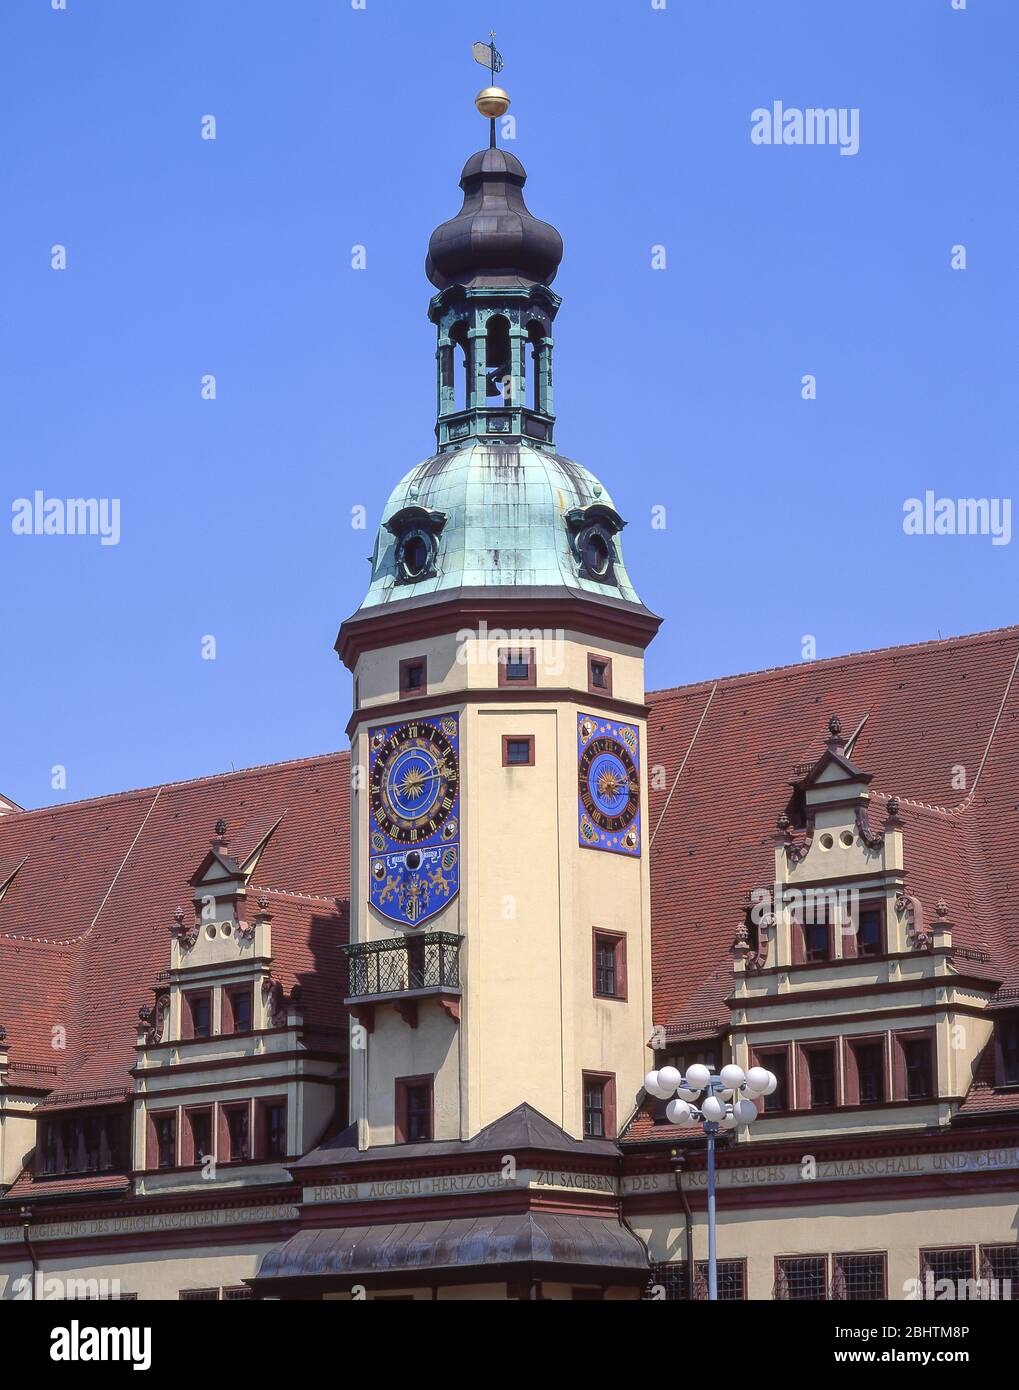 Clock tower, Old Town Hall (Altes Rathaus), Markt, Leipzig, Saxony, Federal Republic of Germany Stock Photo